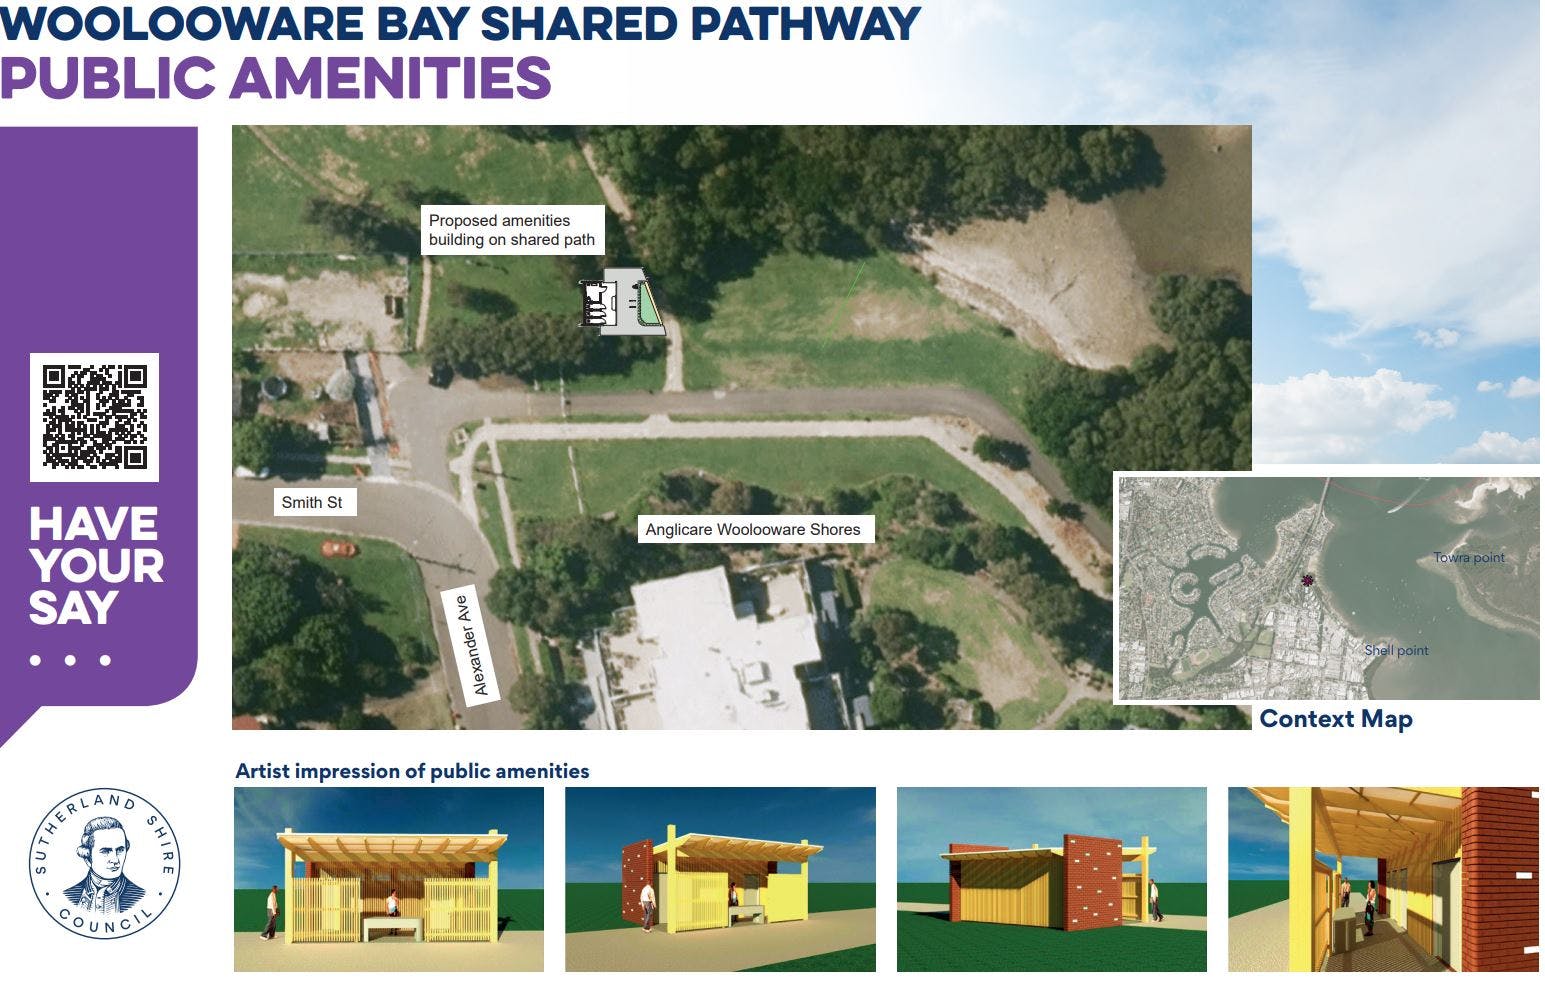 Woolooware Bay Shared Pathway public amenities concept plan 